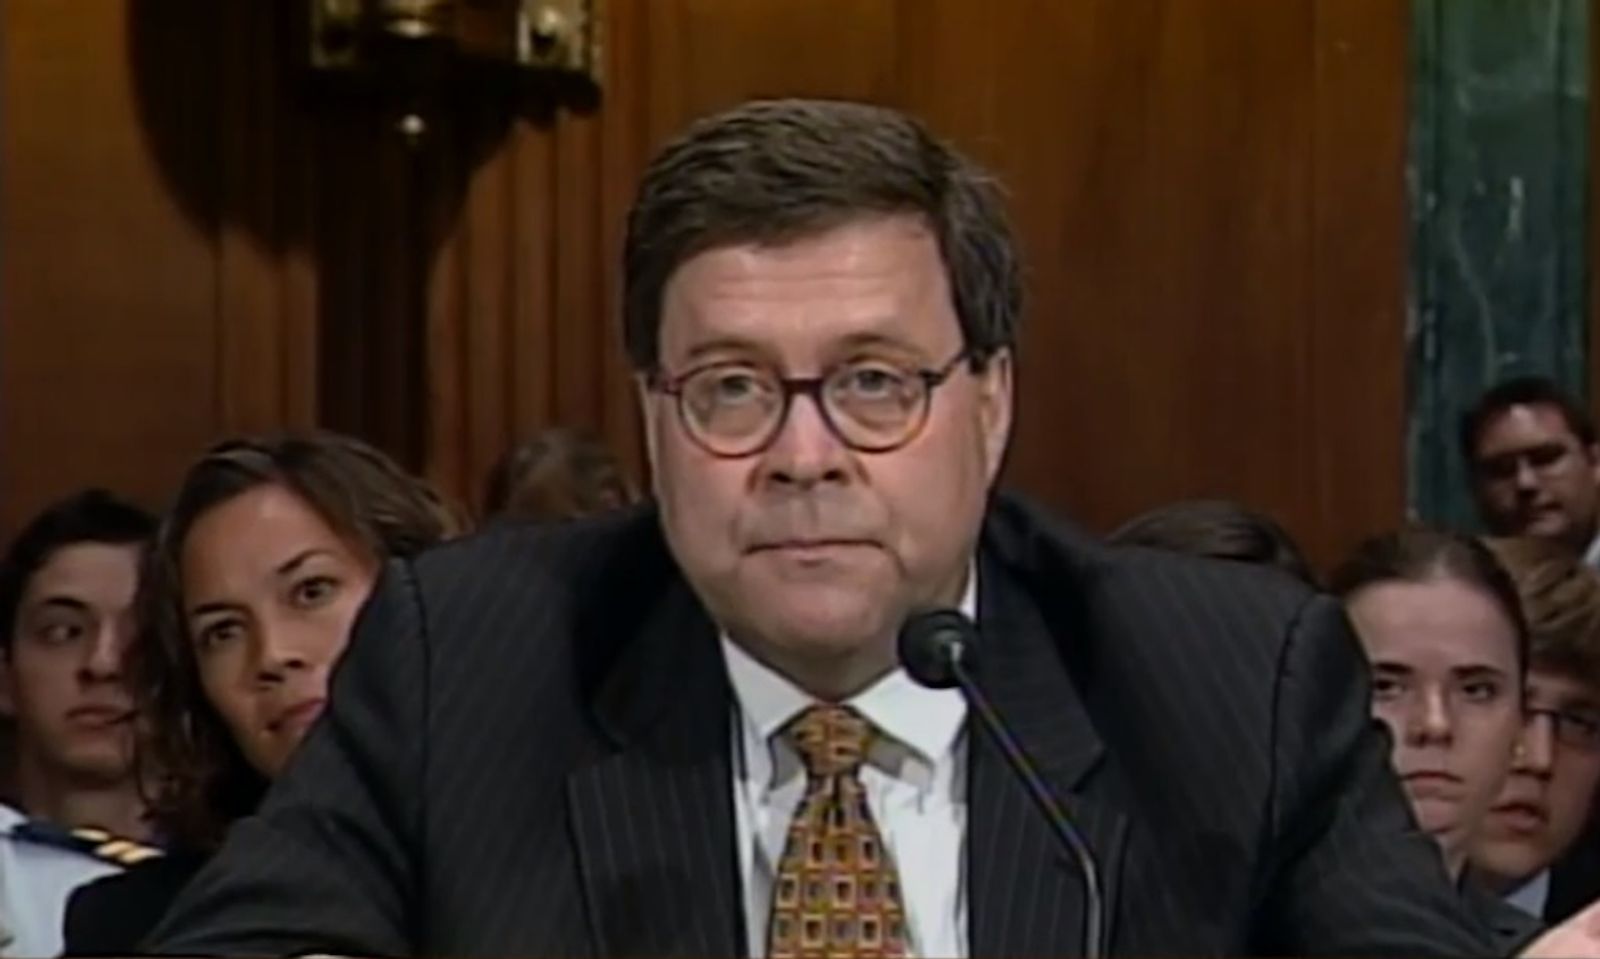 Trump AG Pick William Barr Expected To Lead New Crackdown On Porn